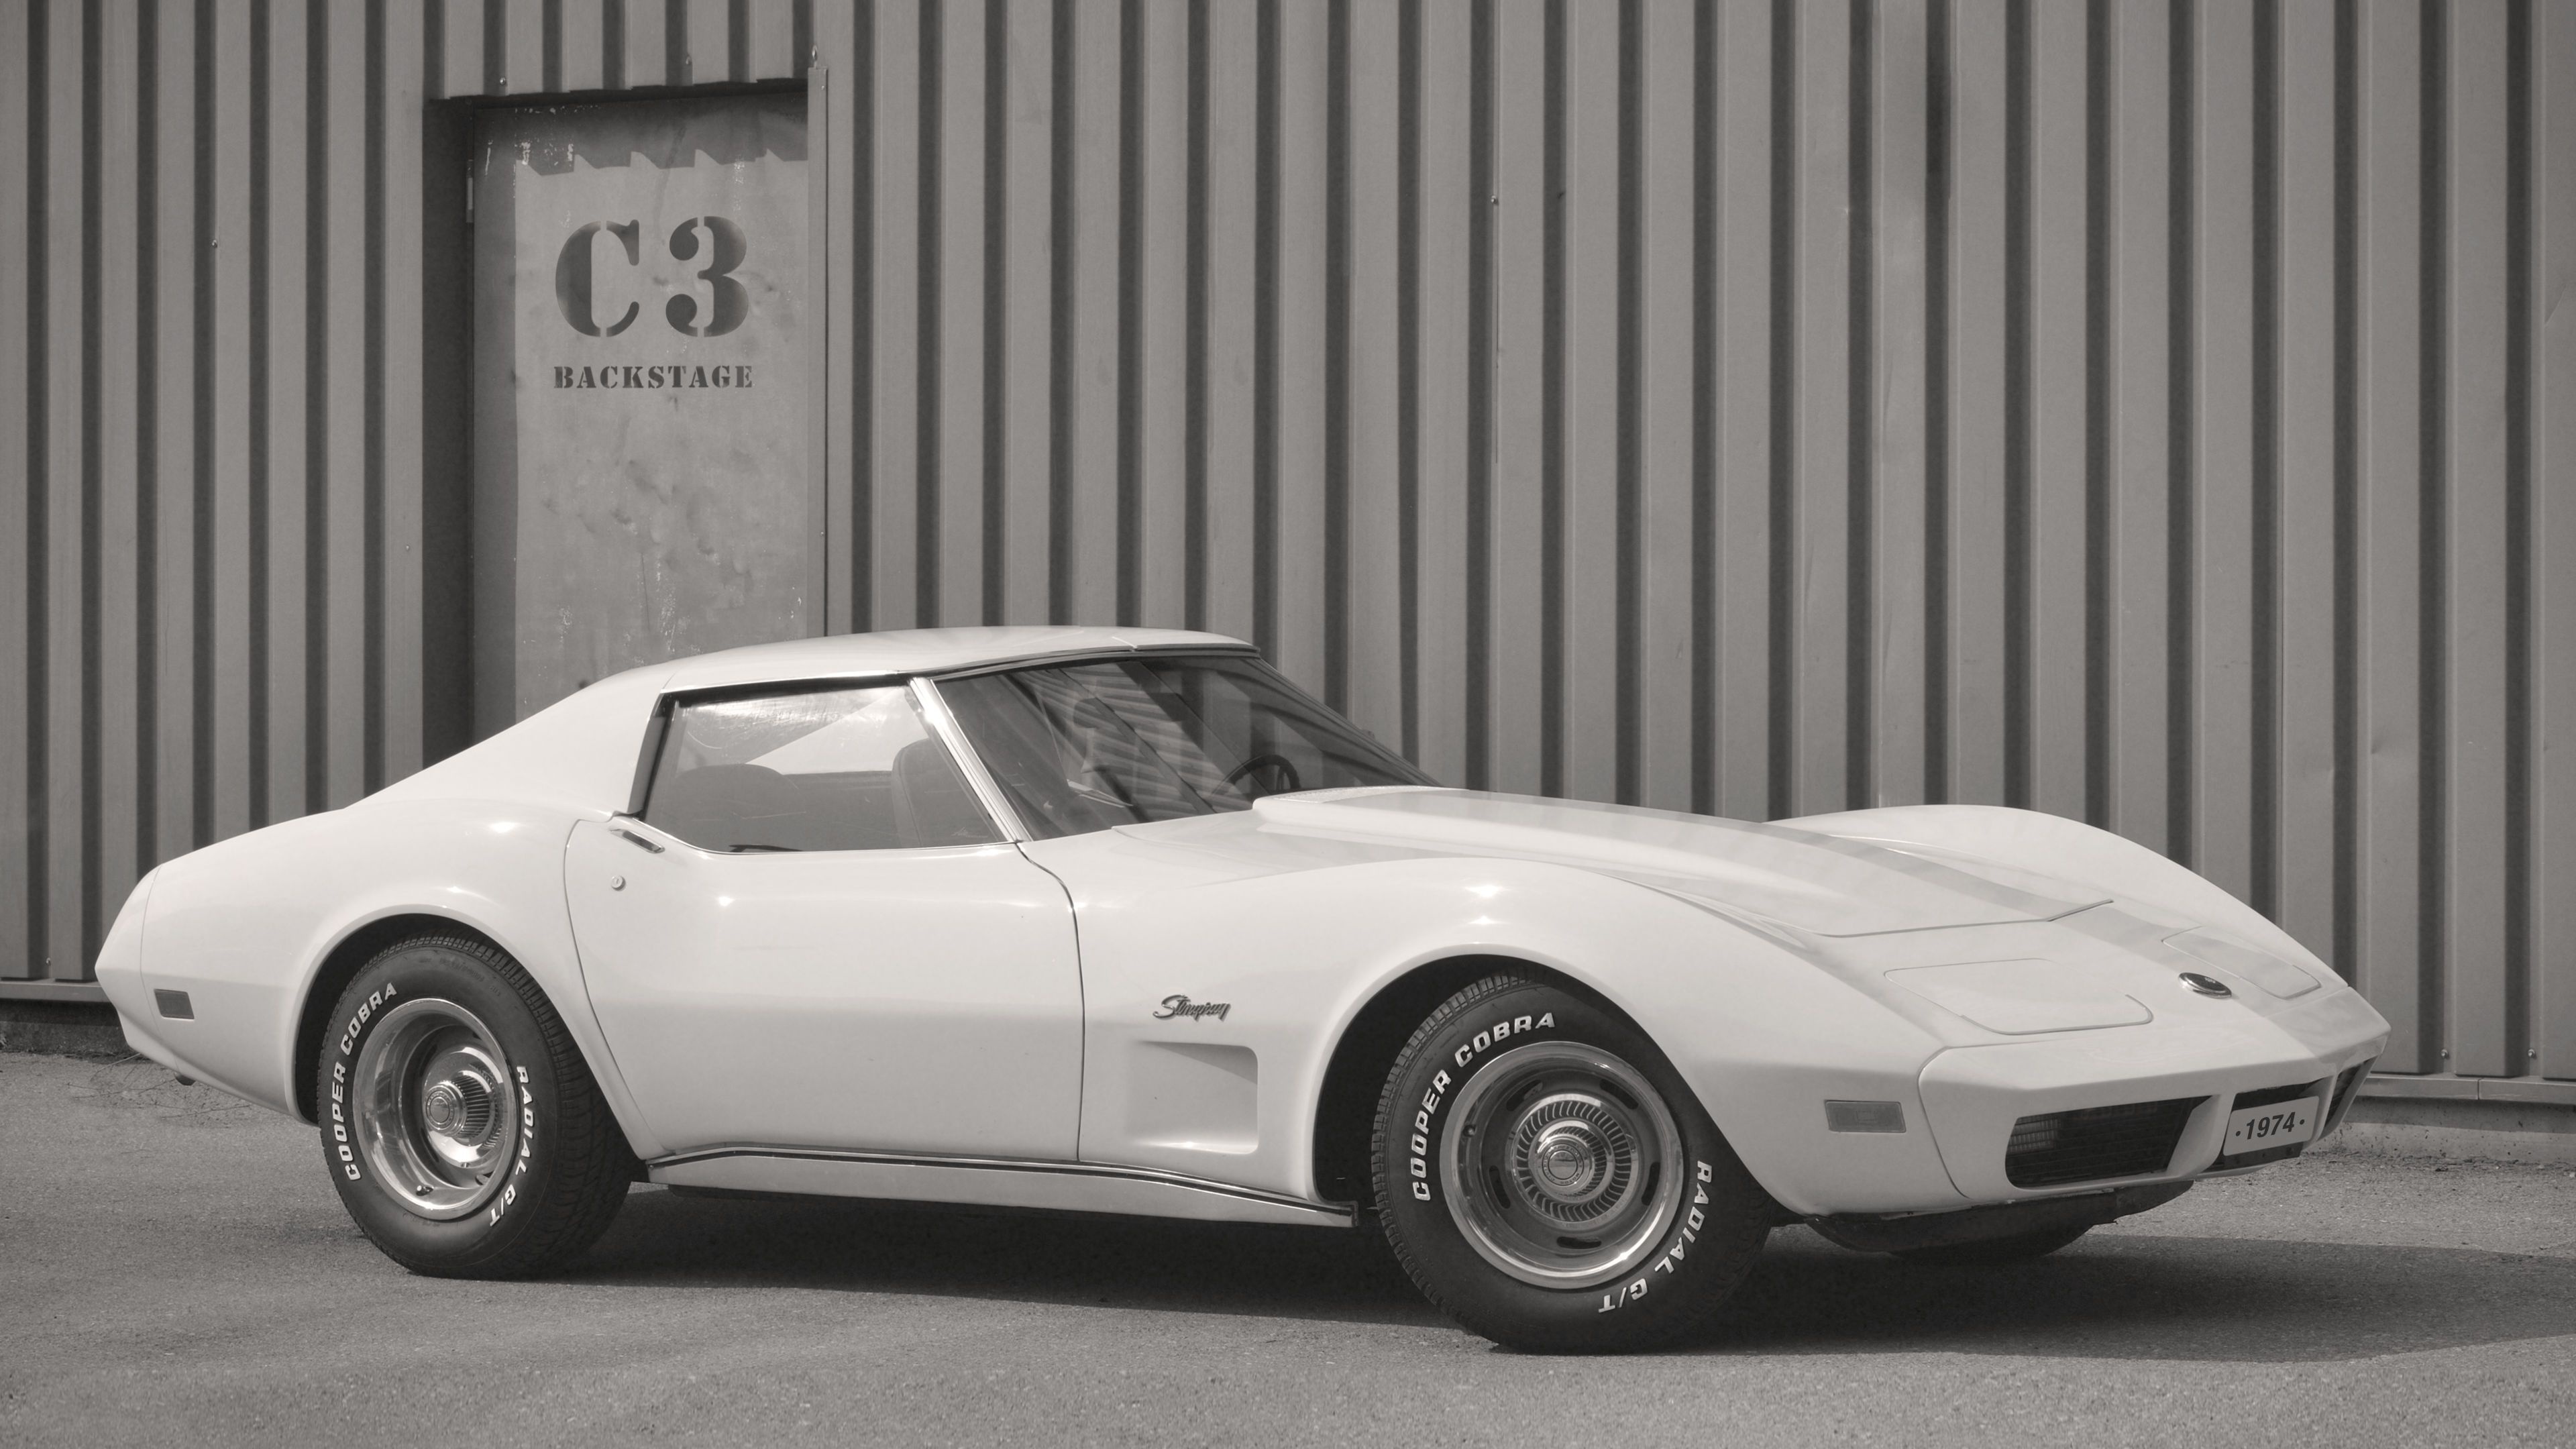 Corvette: Monochrome Chevy C3 of 1974, A popular vintage model equipped with LS-4 big-block V8 engine. 3840x2160 4K Background.